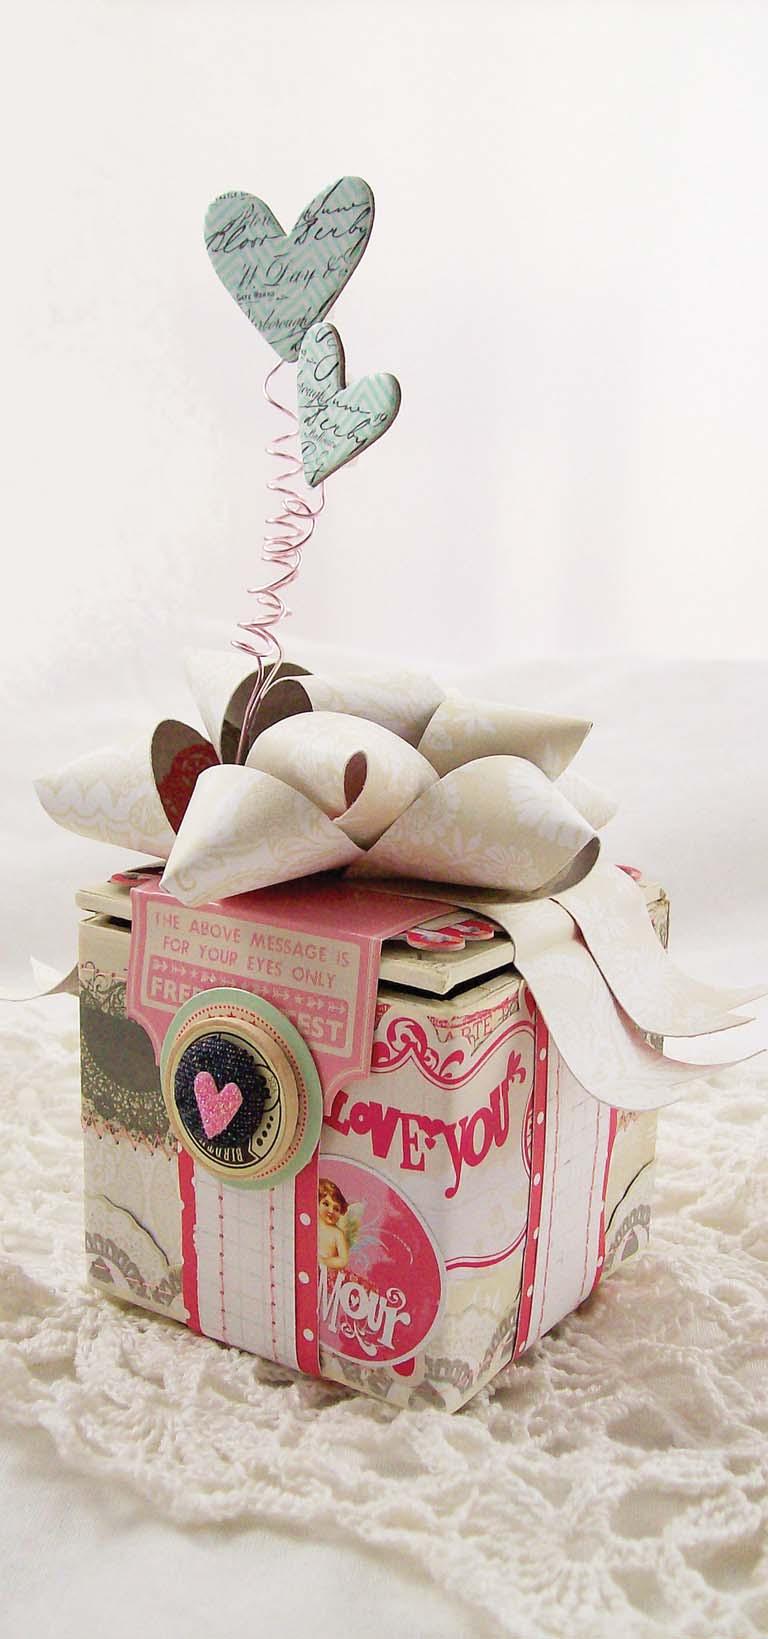 Use fold paper tag from paper goods for box